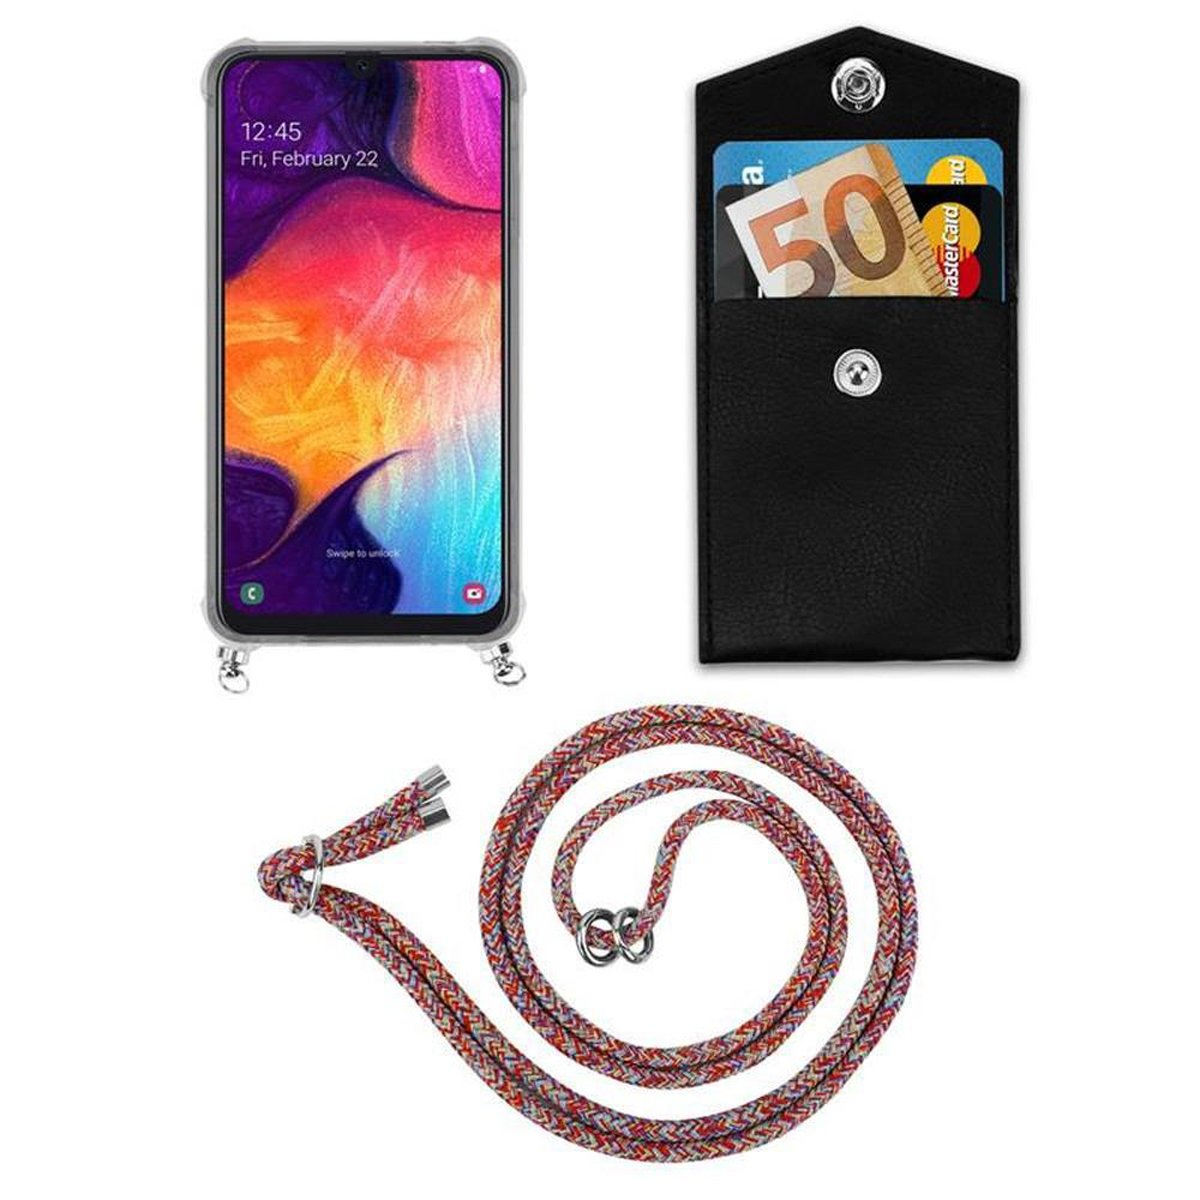 CADORABO Handy Kette mit Band Hülle, A50s Silber / Galaxy Samsung, Ringen, PARROT COLORFUL A50 / Kordel und 4G Backcover, A30s, abnehmbarer